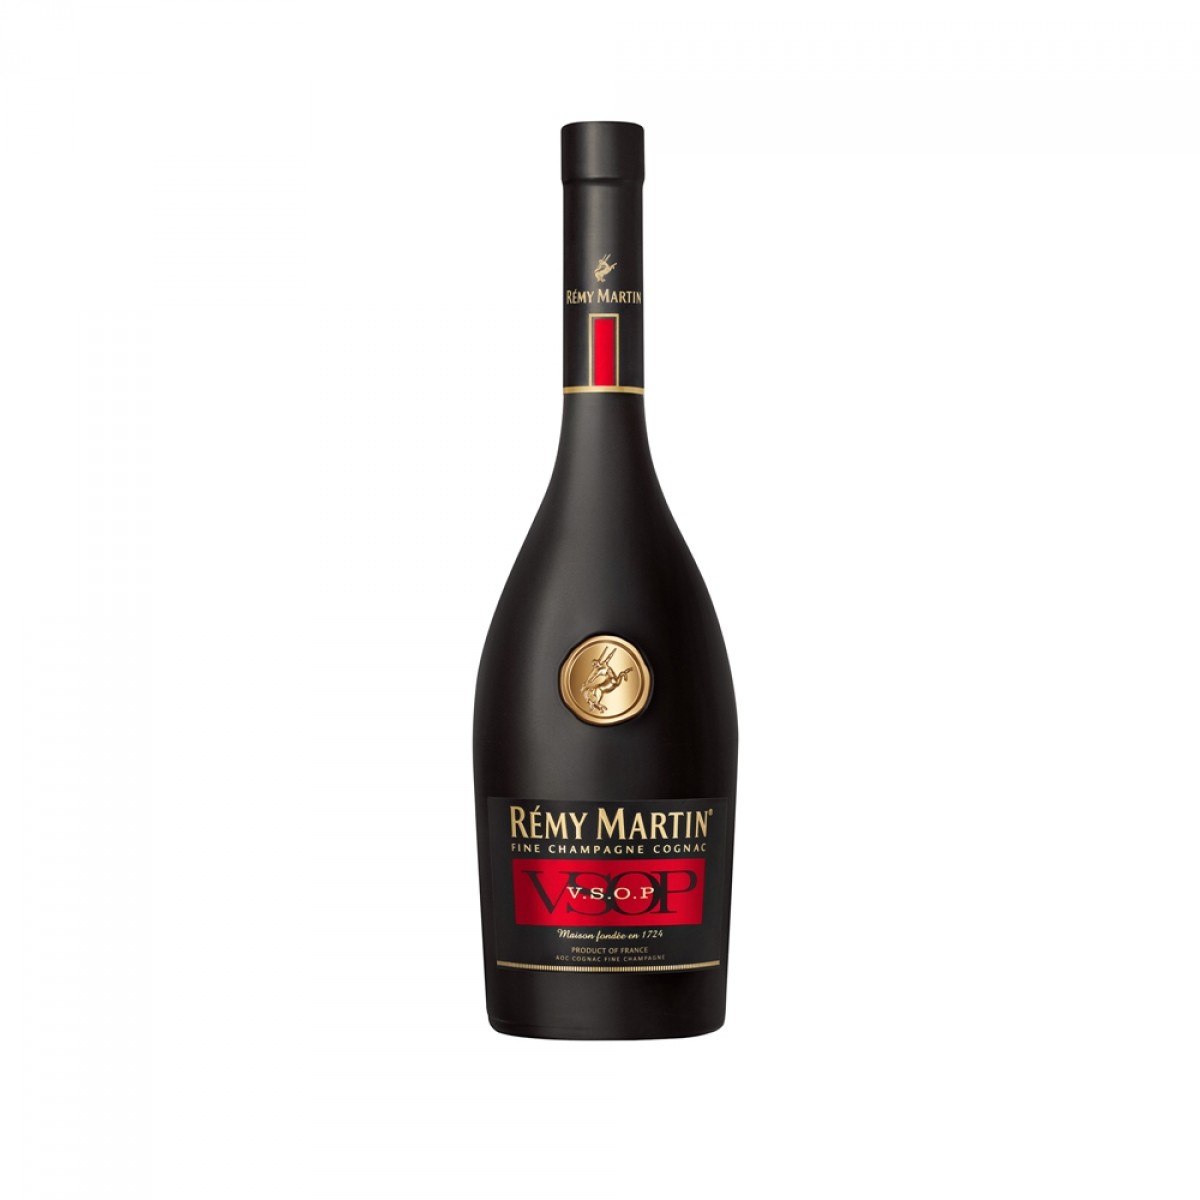 REMY MARTIN VSOP Aelia Duty Free 10% off on your online order